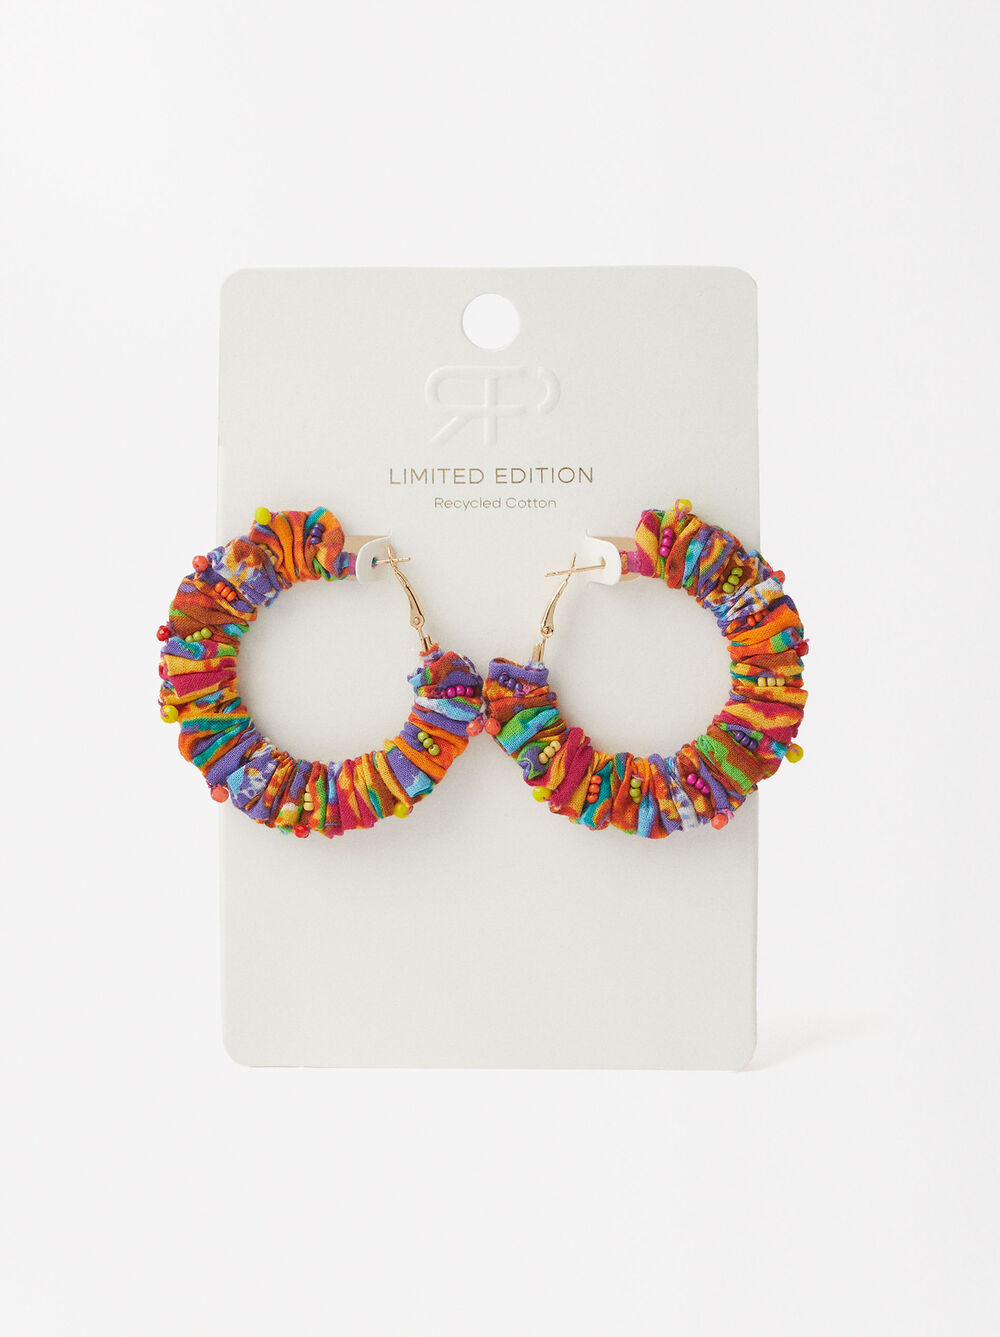 Recycled Cotton Hoop Earrings - Limited Edition